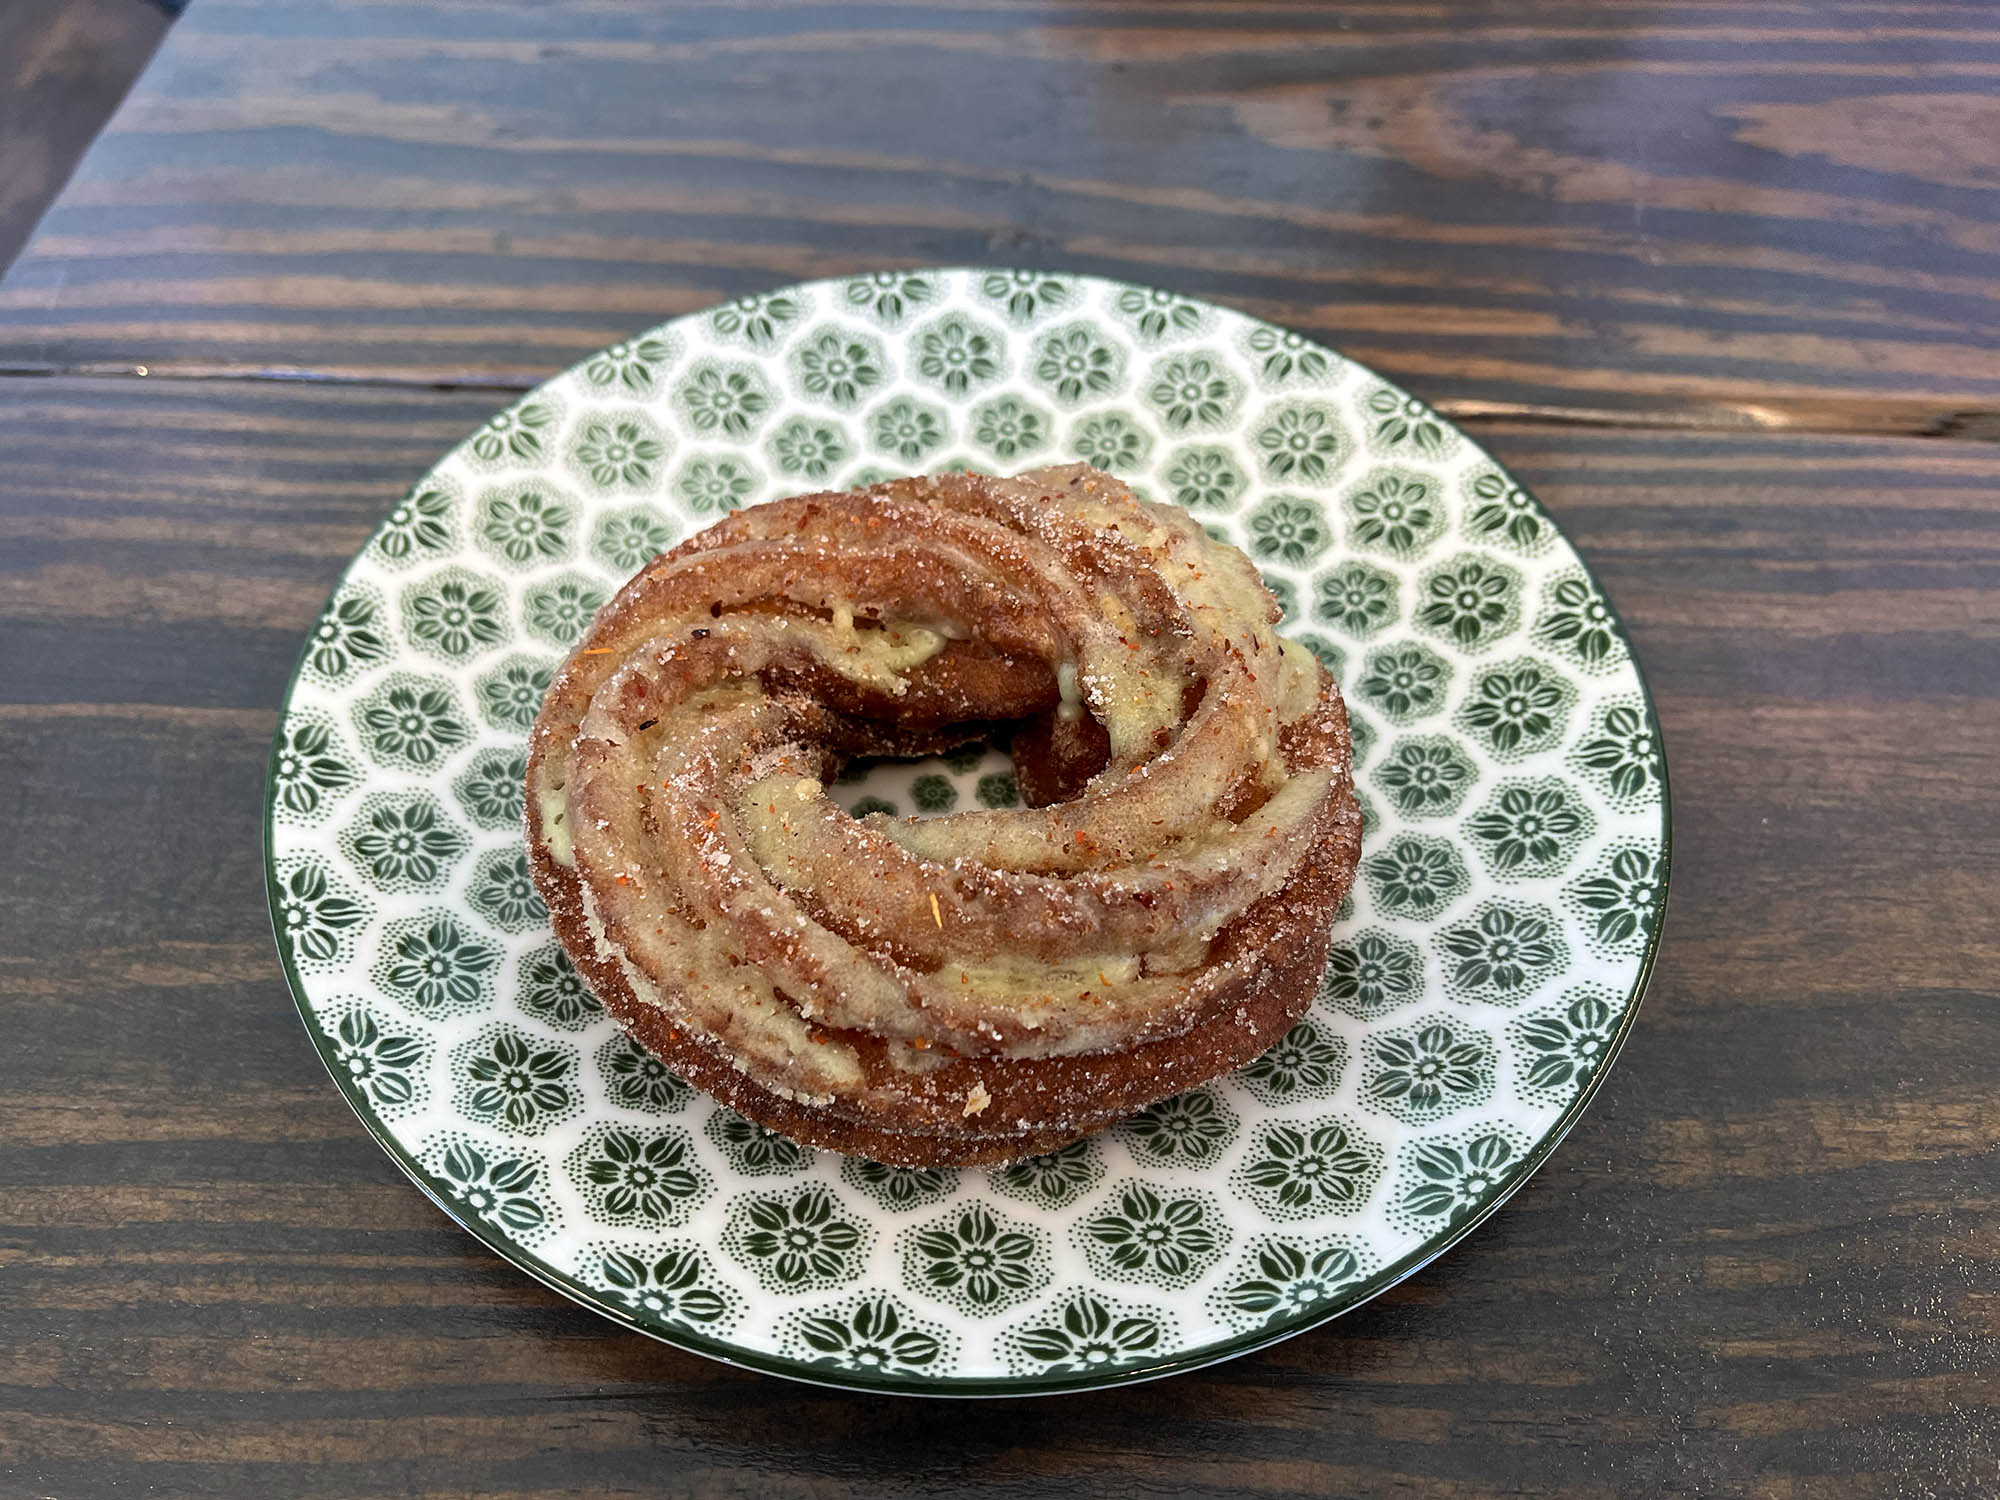 A round cruller on a green-and-white plate.